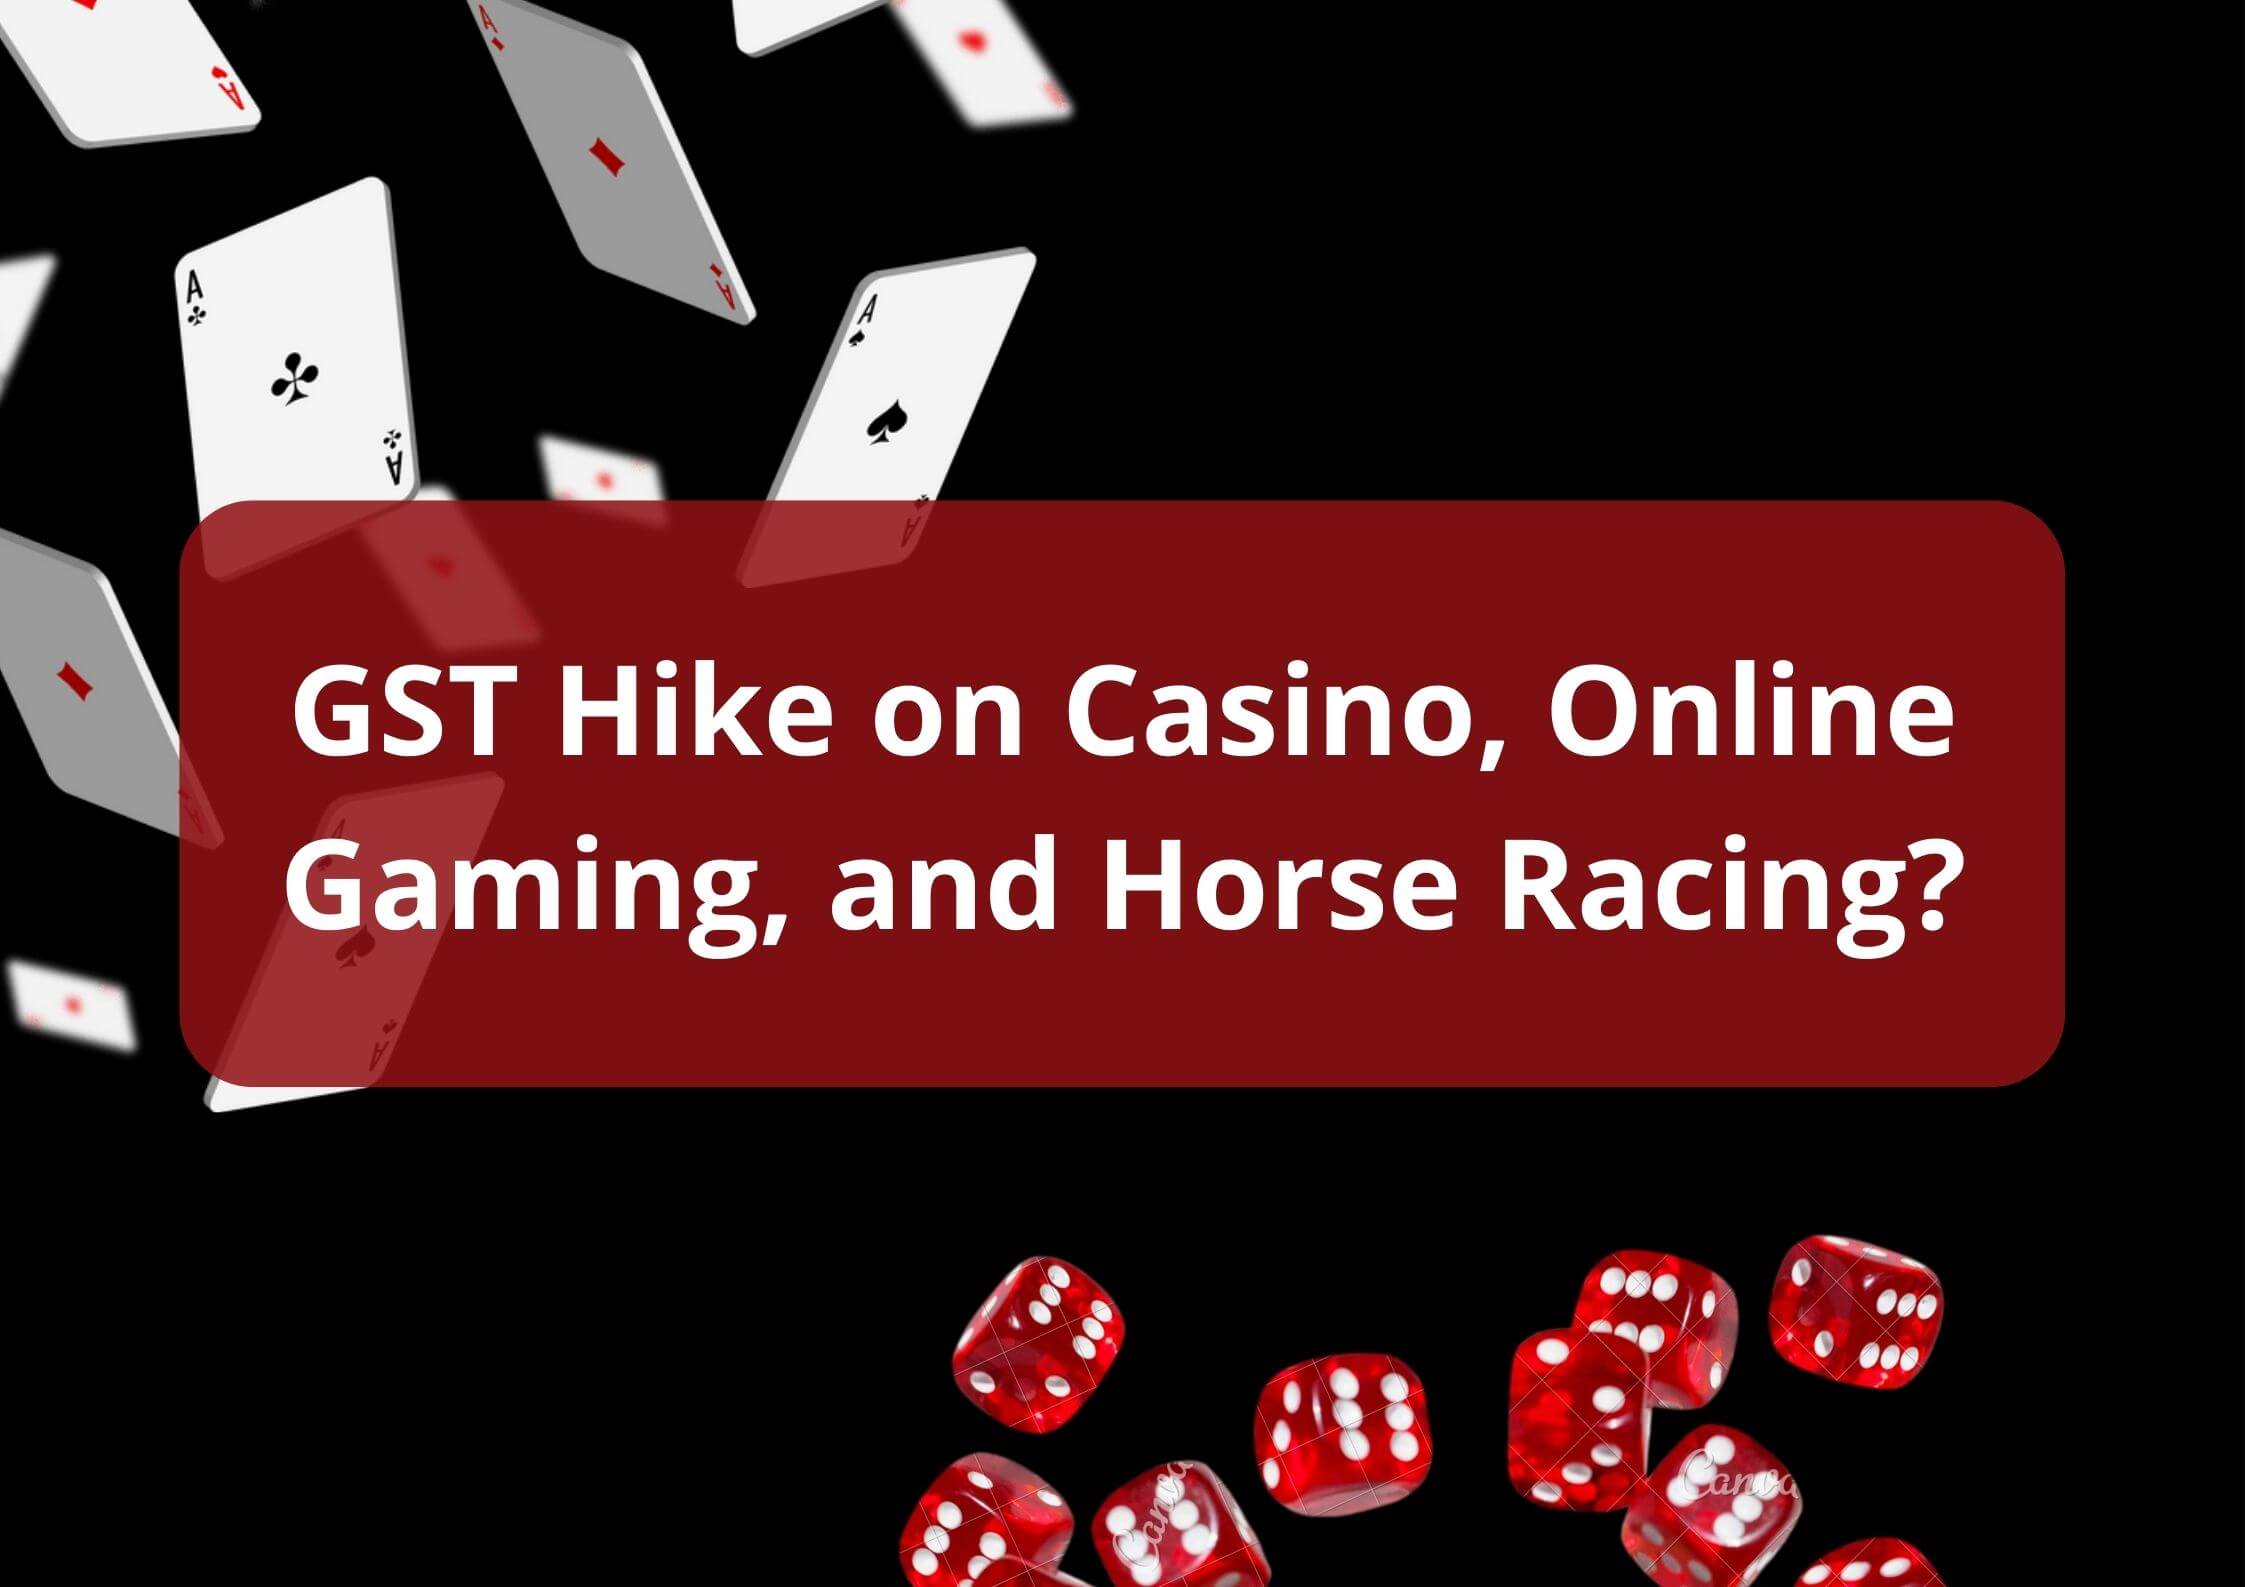 GoM to Submit Proposed GST Hike on Online Games, Casinos & Betting to FM